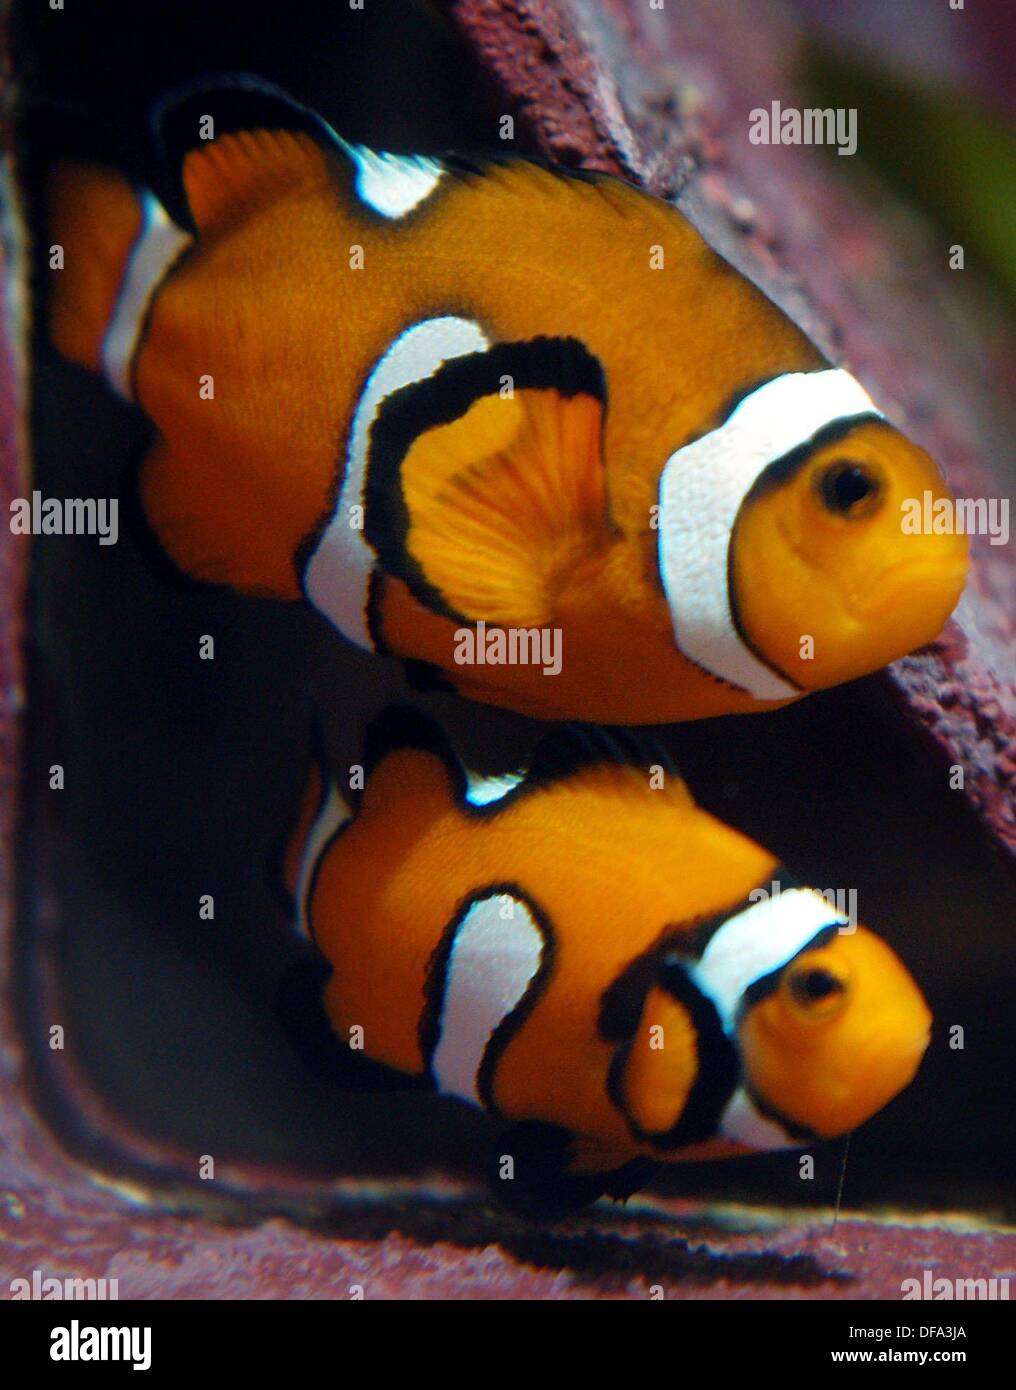 Two clownfish on the 18th of November in 2003. The fish have become famous after the animation movie 'Finding Nemo'. Stock Photo